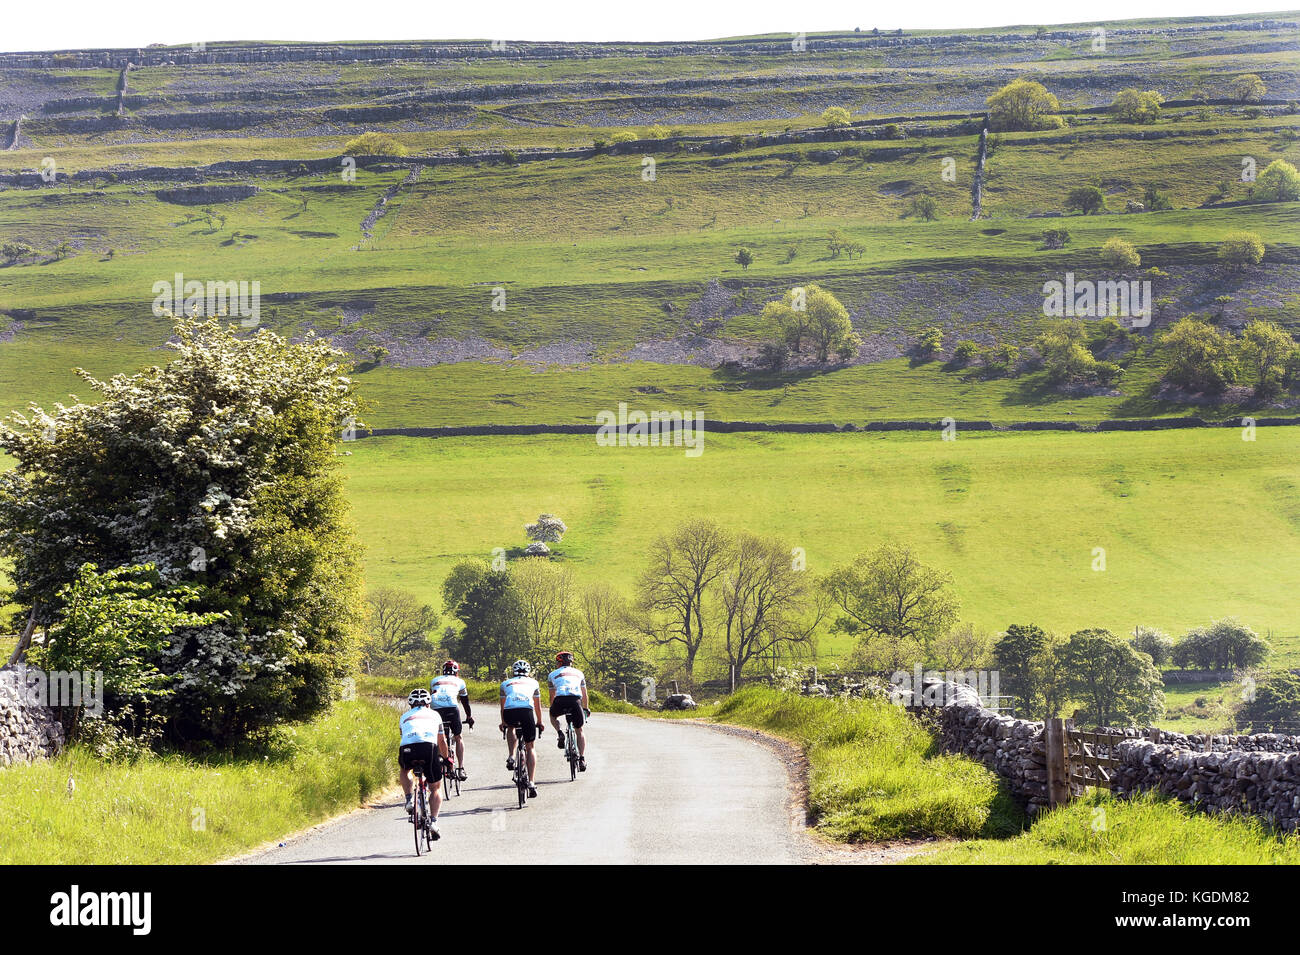 Cycling in the beautiful Yorkshire Dales landscape Stock Photo